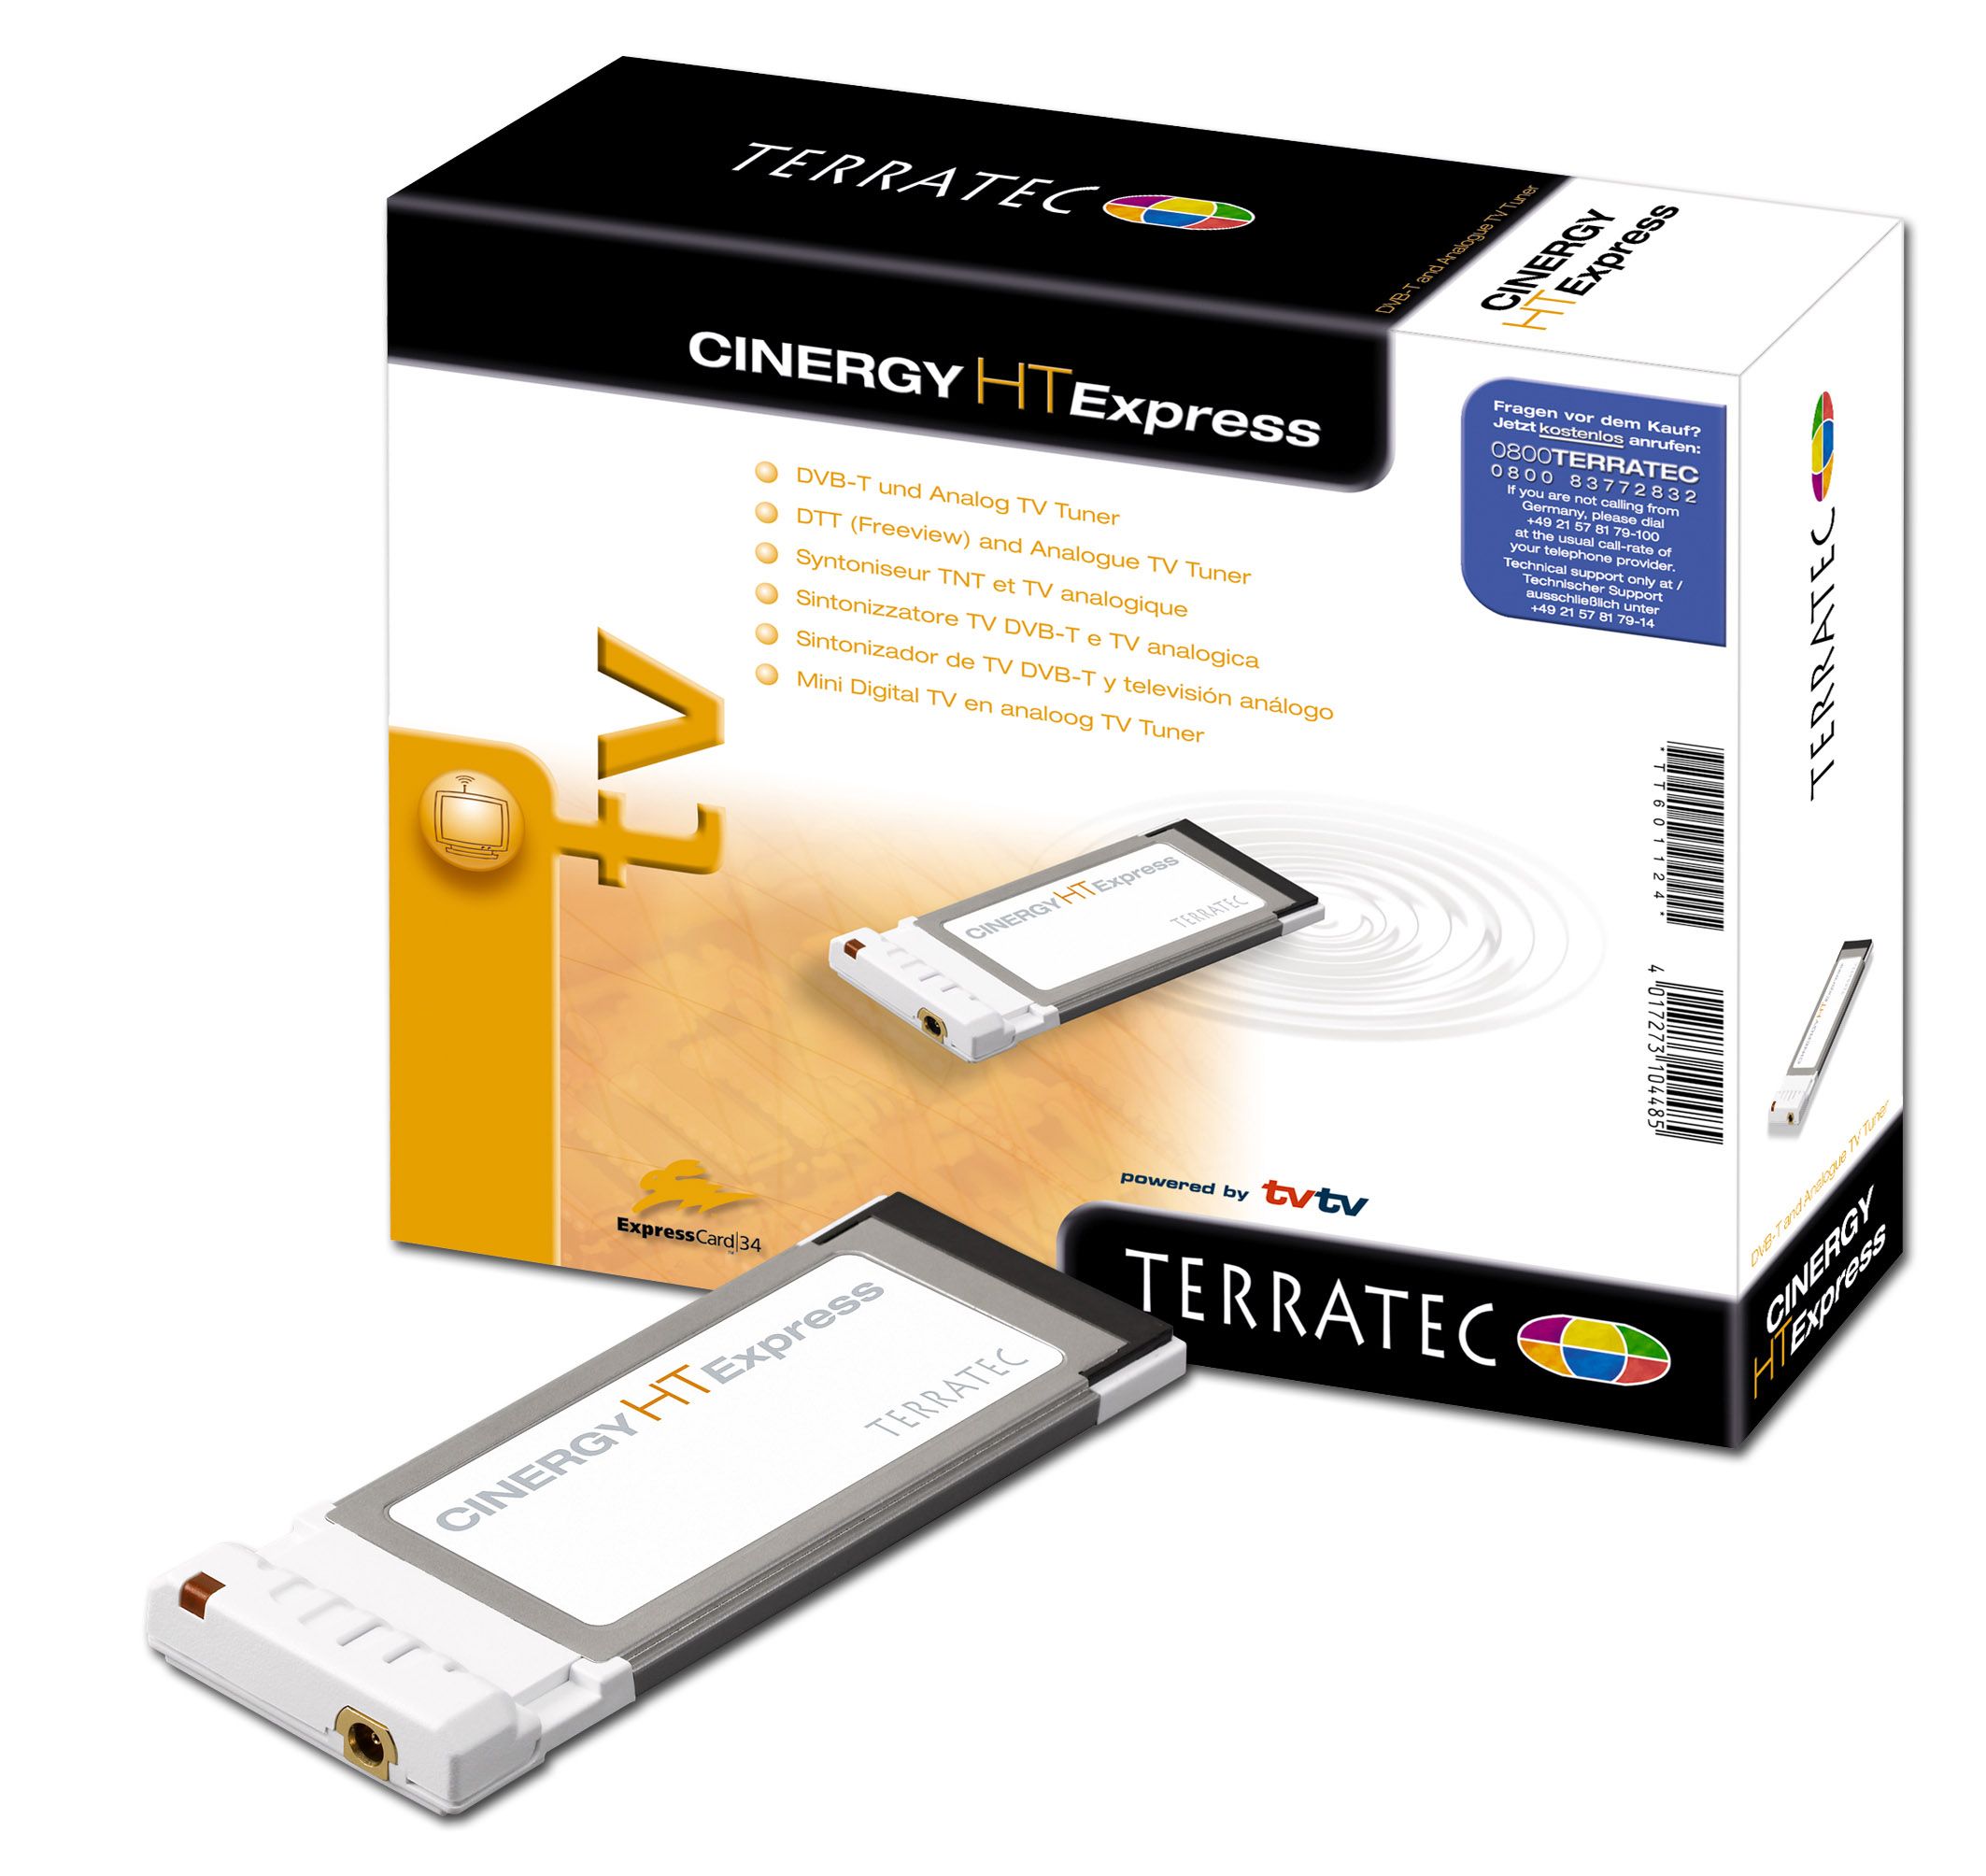 terratec cinergy ht express image 1